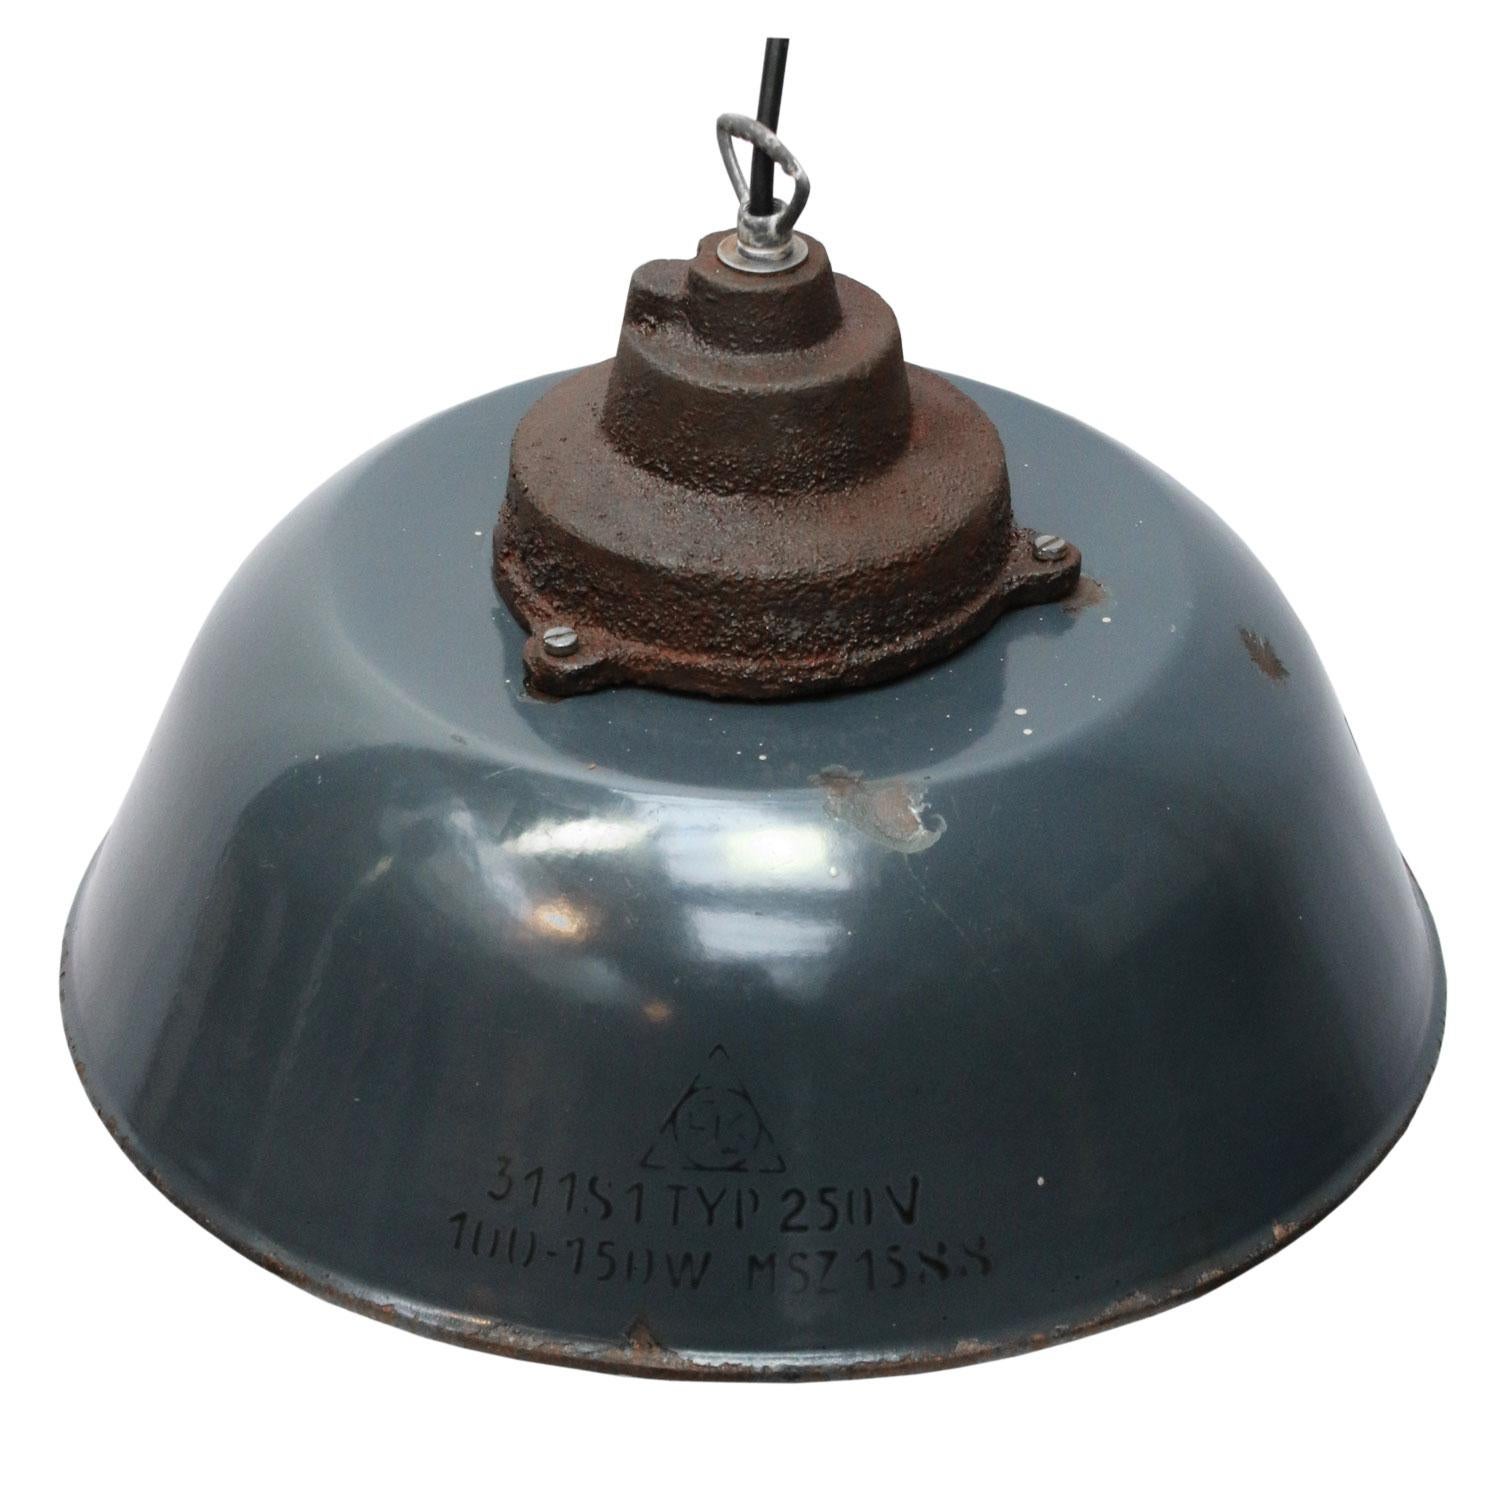 Factory pendant
Dark blue enamel with white interior
Rusty cast iron top.

Weight 3.20 kg / 7.1 lb

Priced per individual item. All lamps have been made suitable by international standards for incandescent light bulbs, energy-efficient and LED